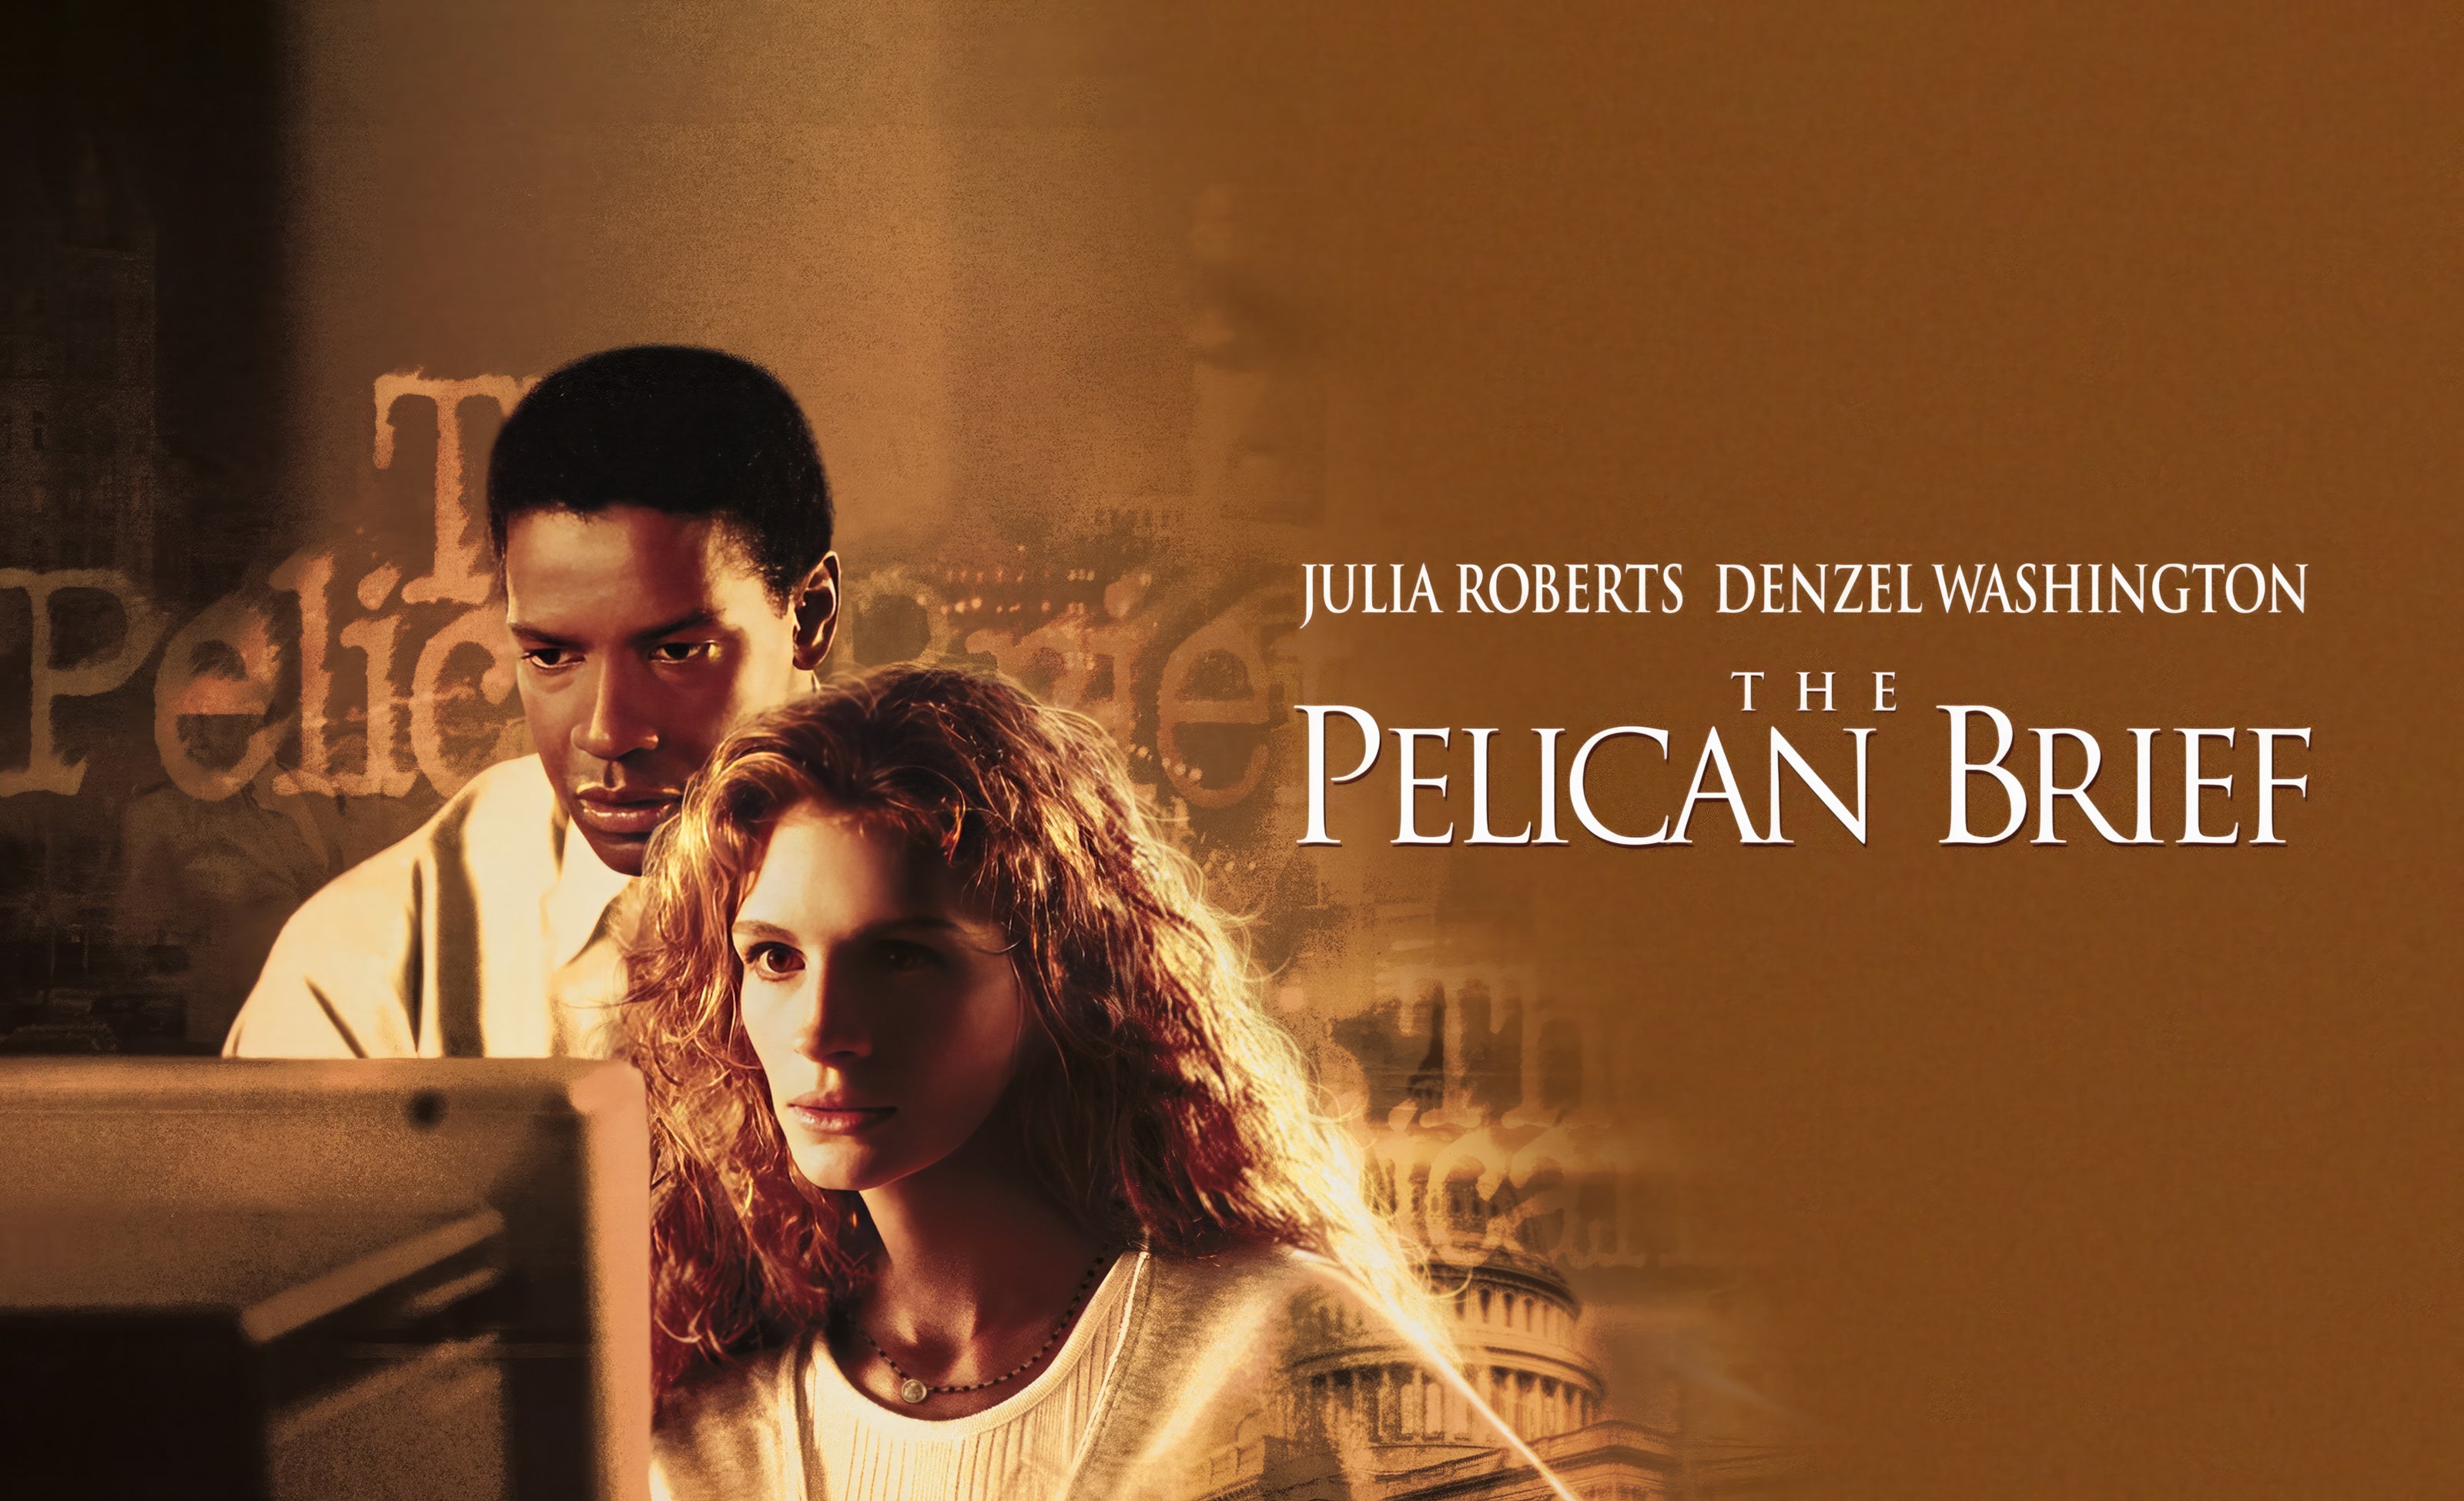 The Pelican Brief Script Screenplay - Image of Movie Poster